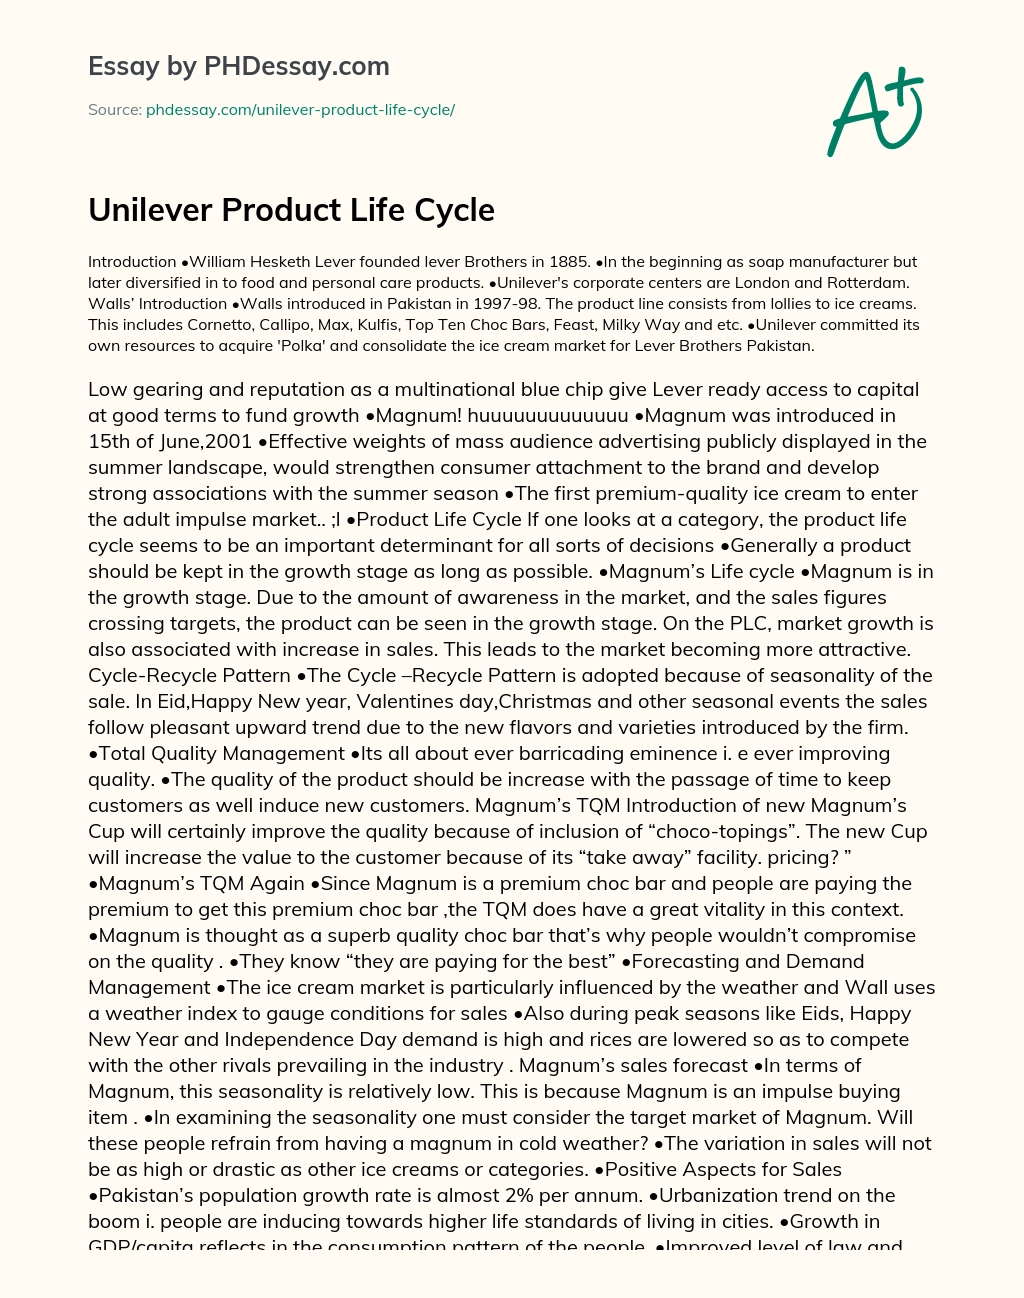 Unilever Product Life Cycle essay